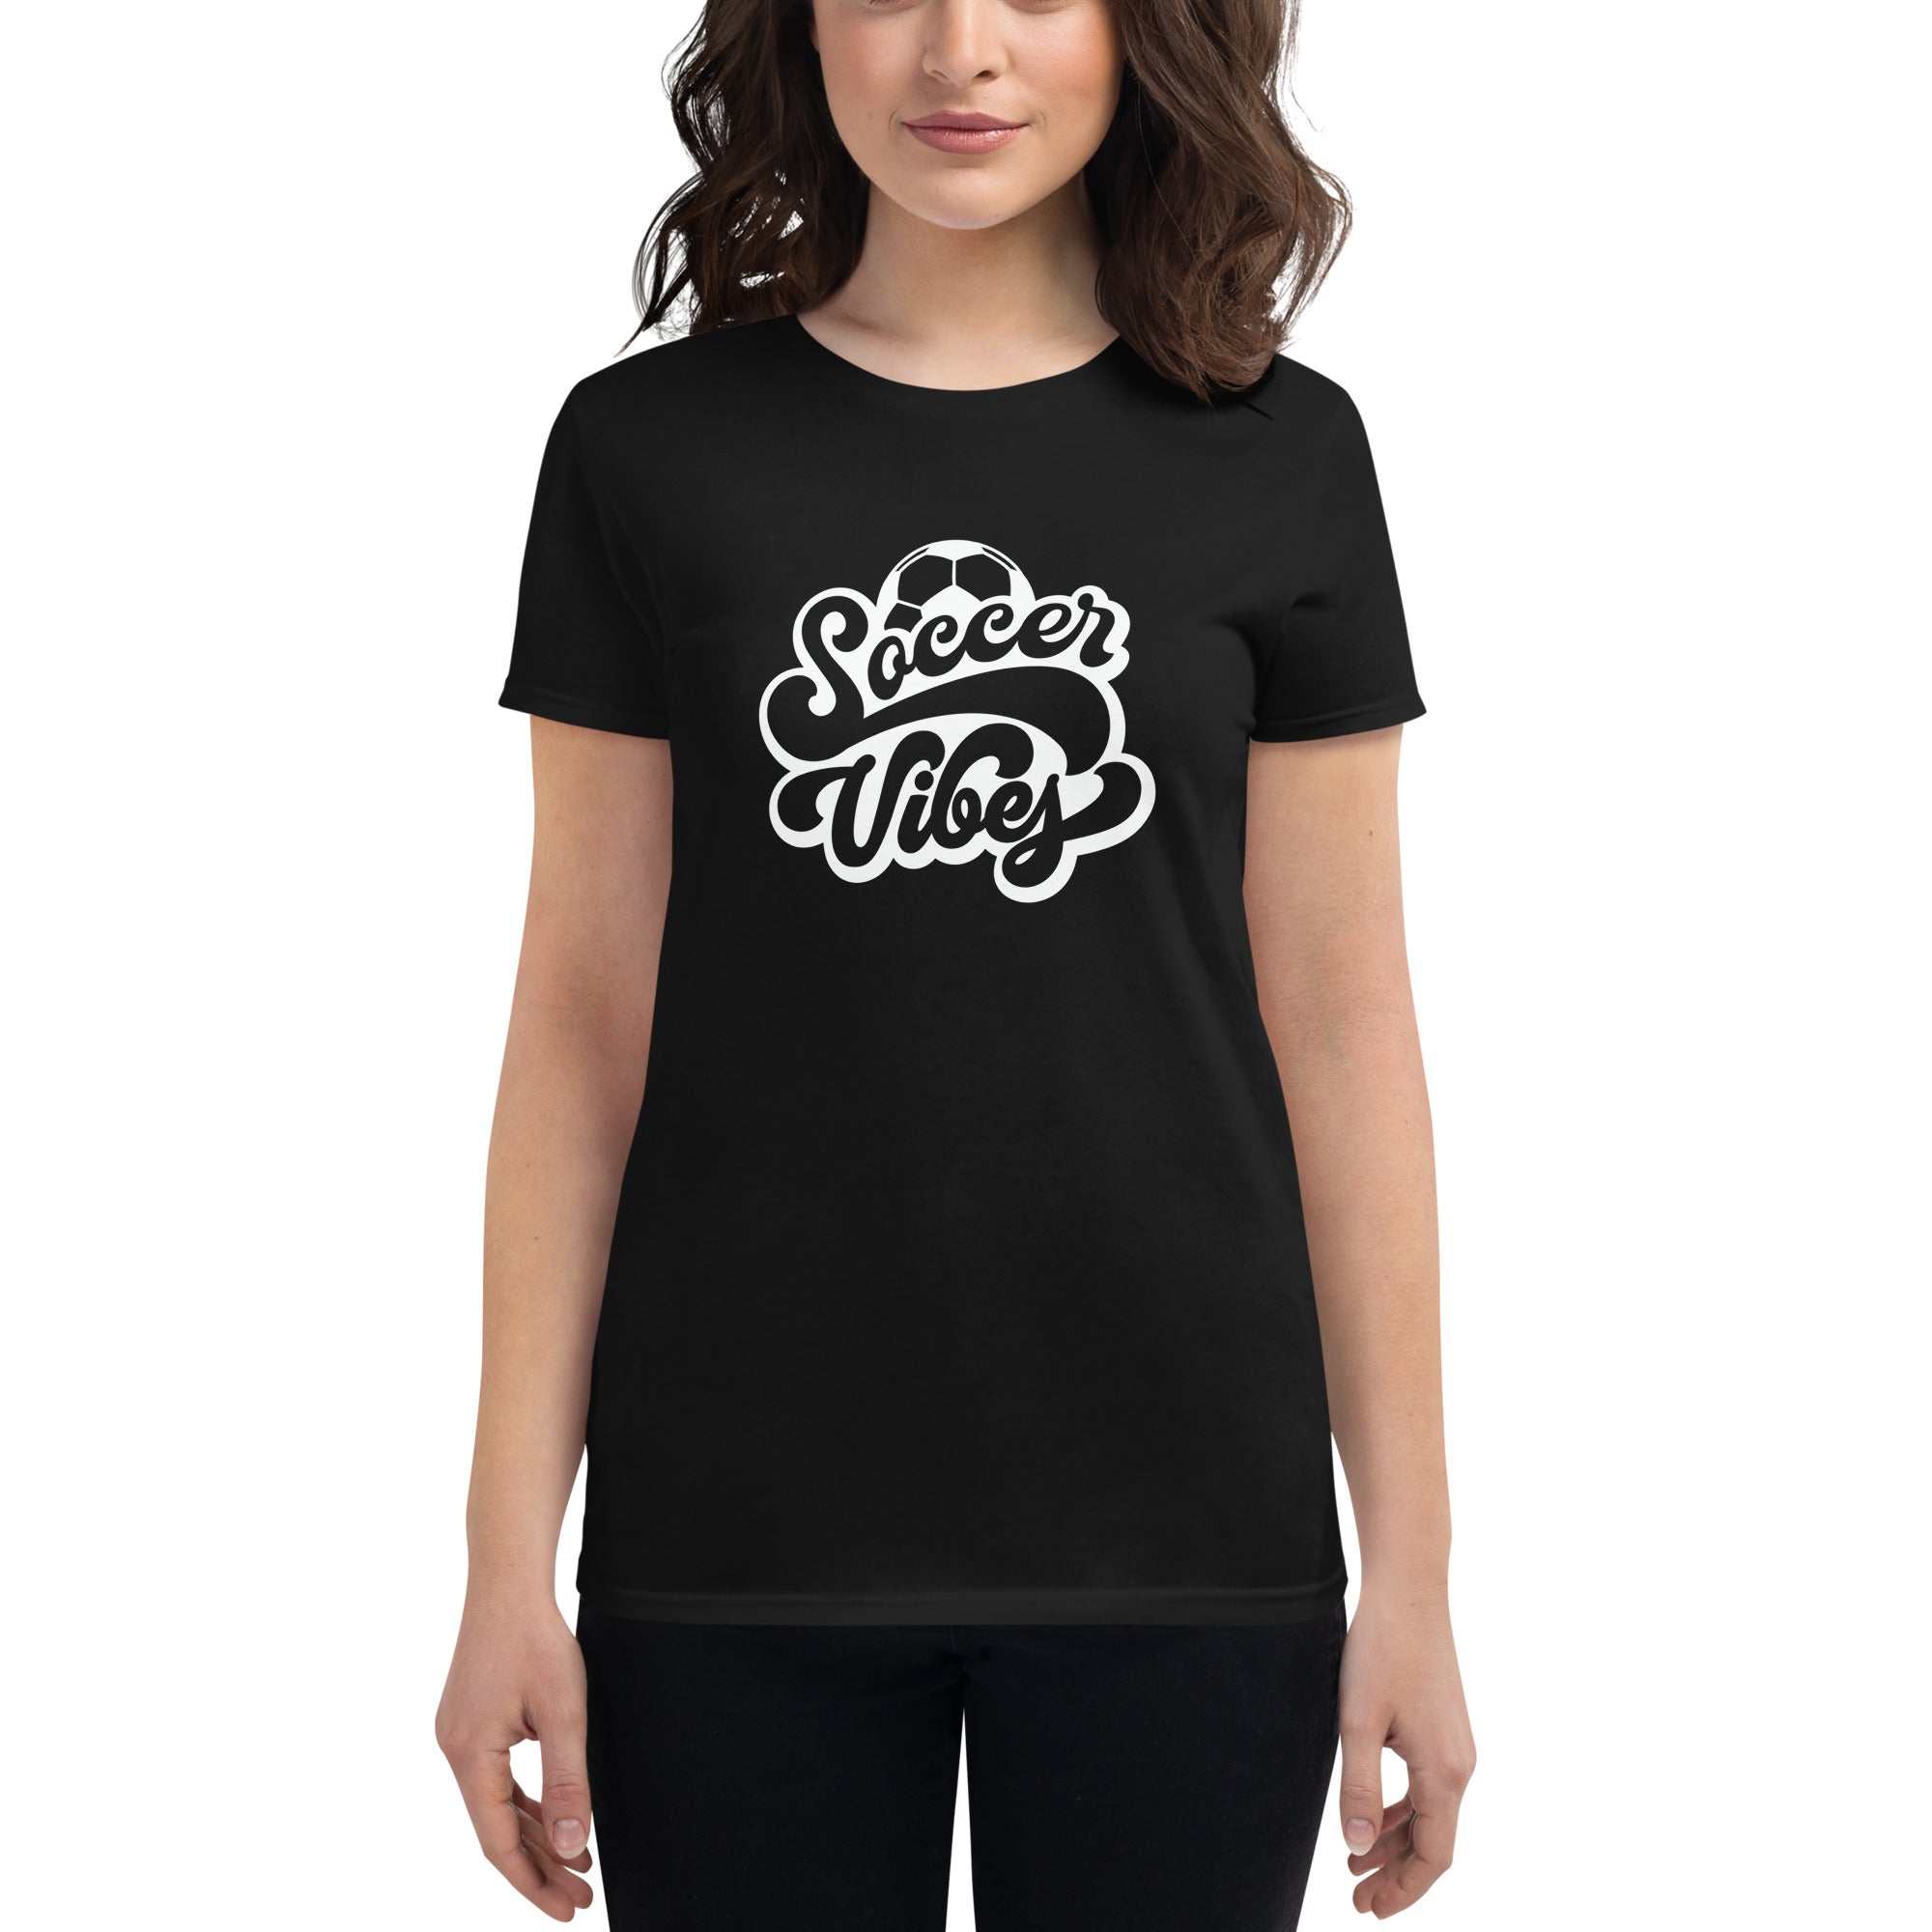 Soccer Vibes Women's Fitted T-Shirt